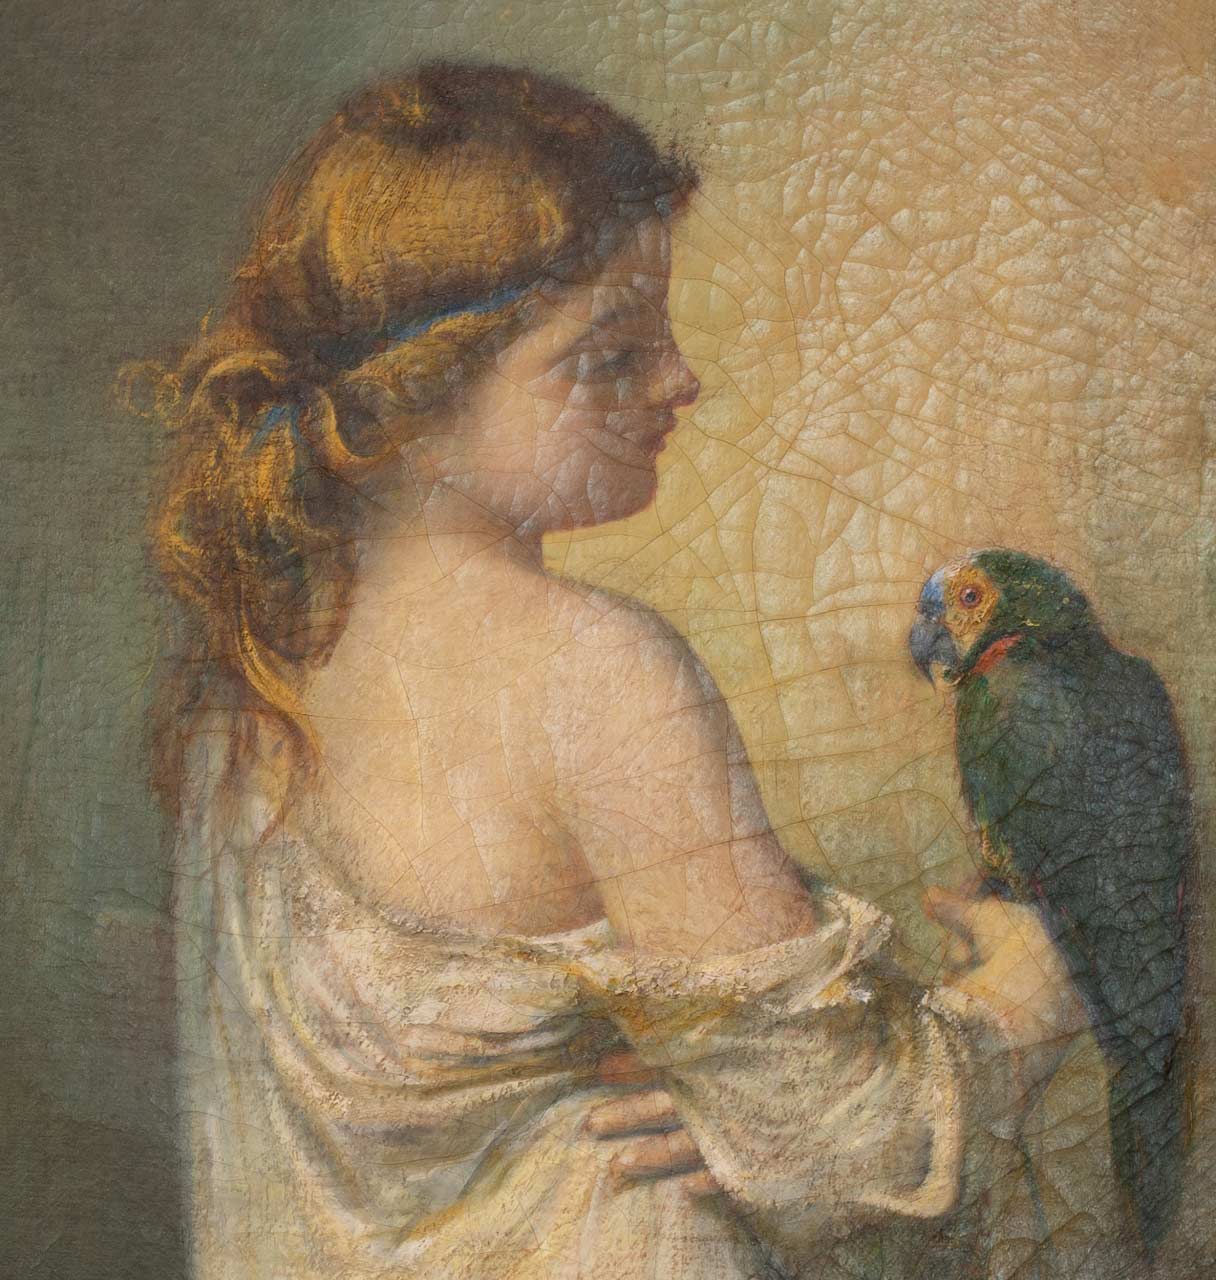 A portrait looking over the shoulder of a girl, holding a parrot on her hand.